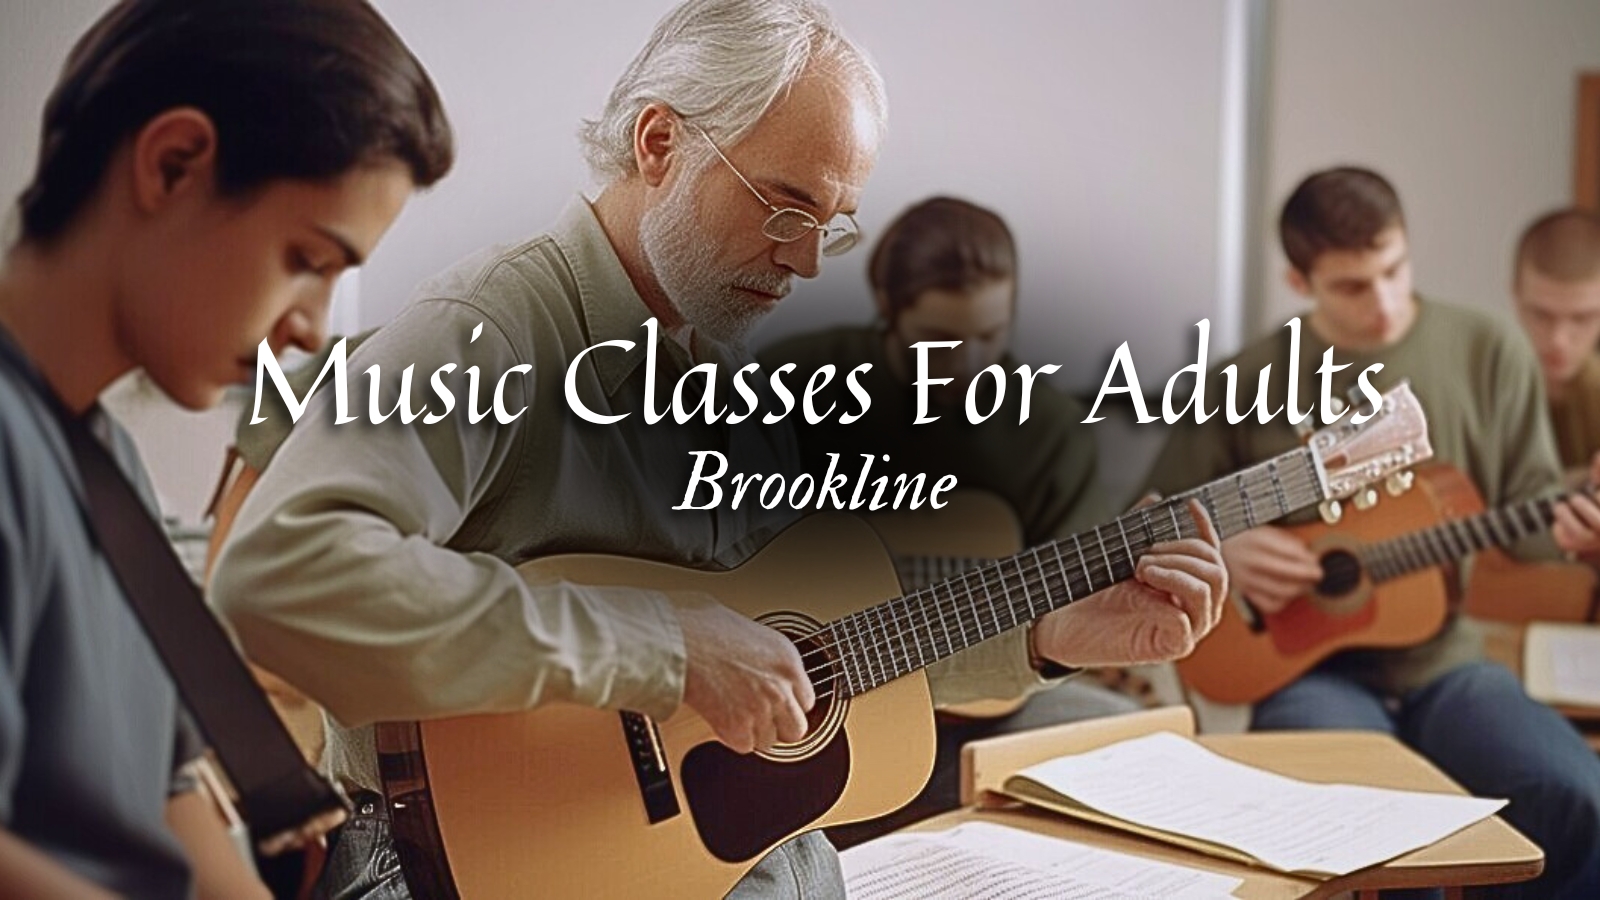 Music Classes for Adults in Brookline, Massachusetts: Unlock Your Musical Potential at Musicians Playground